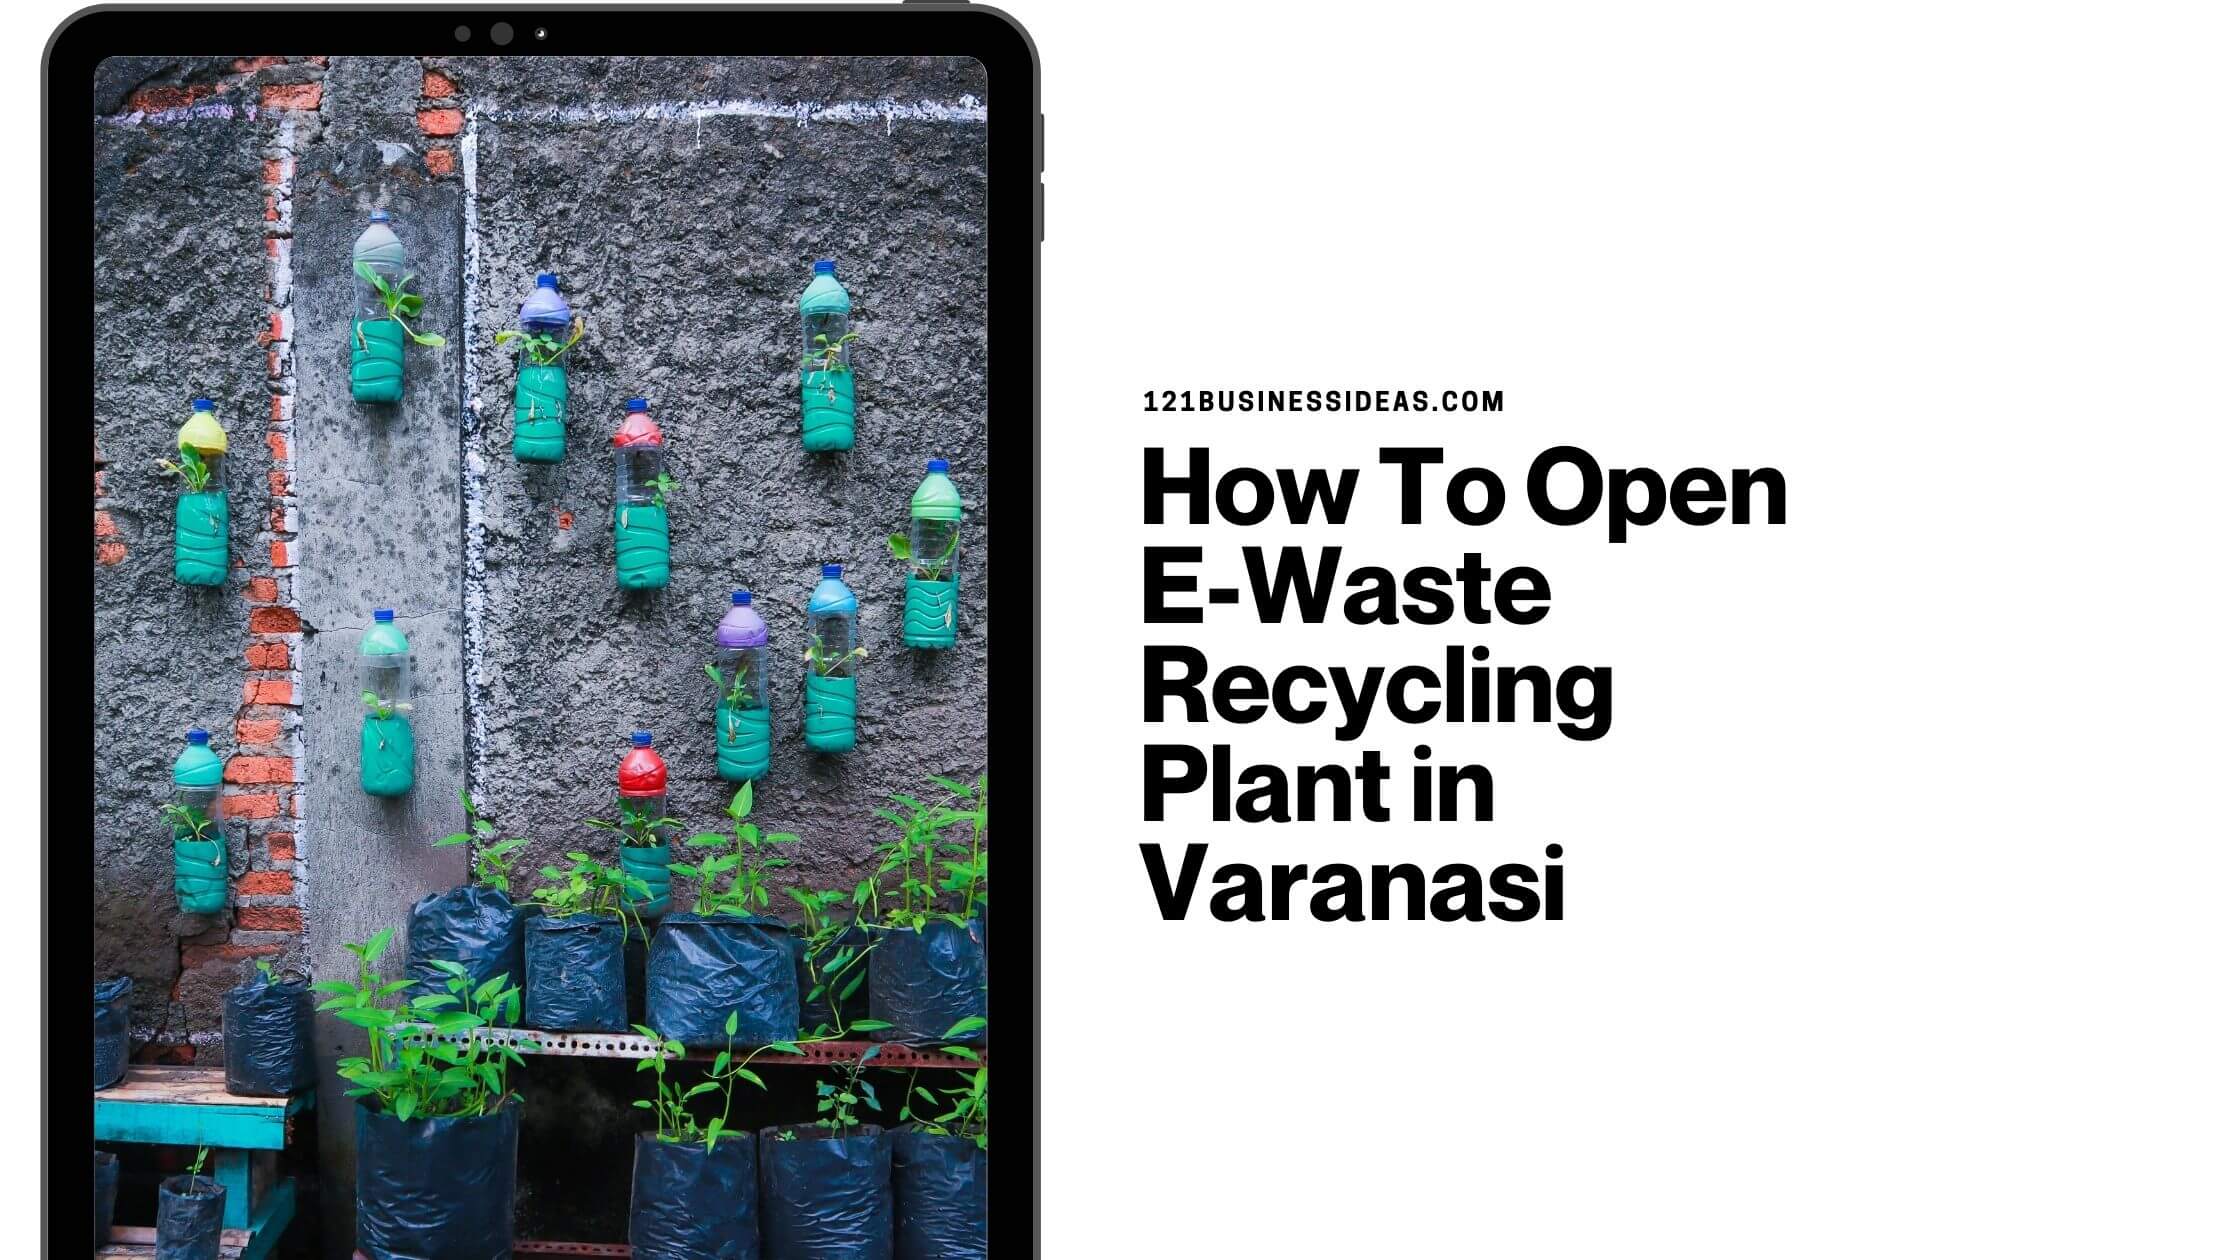 How To Open E-Waste Recycling Plant in Varanasi (1)